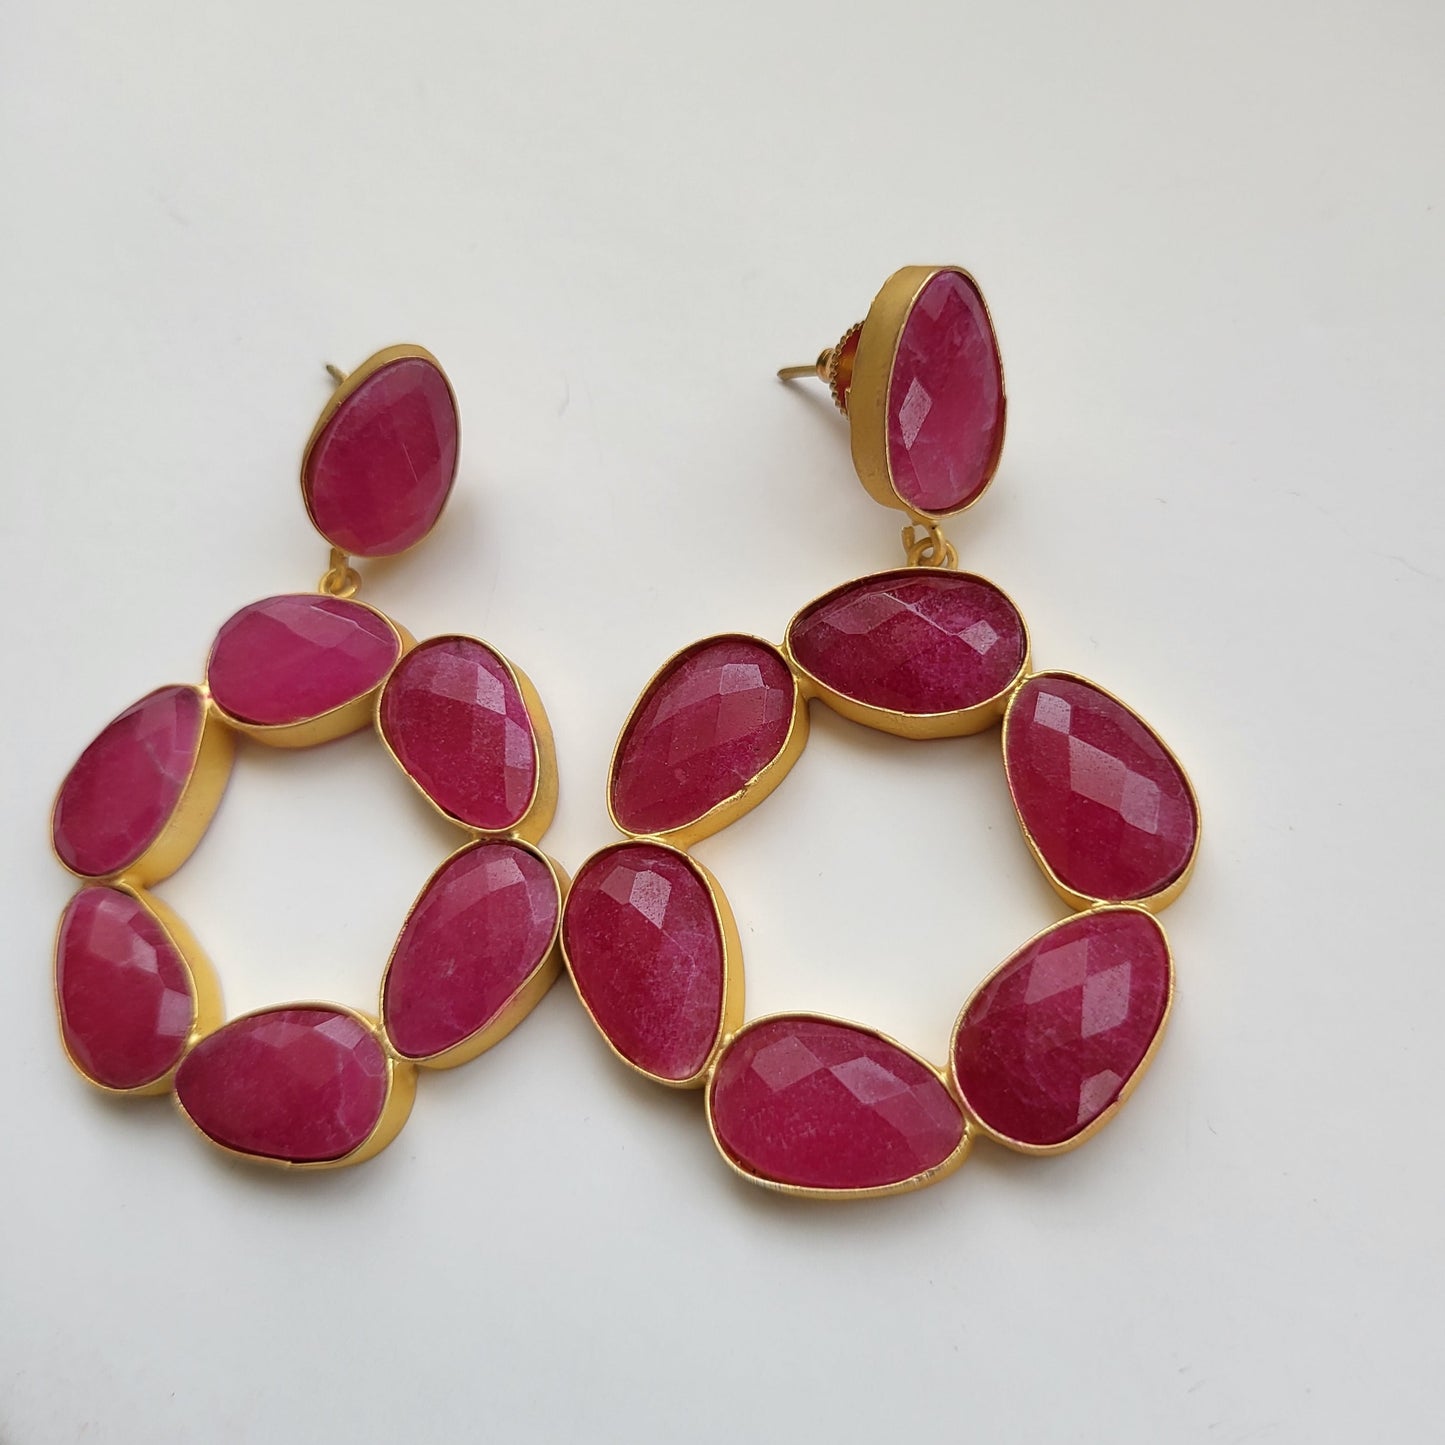 Pink stone on a circle earrings